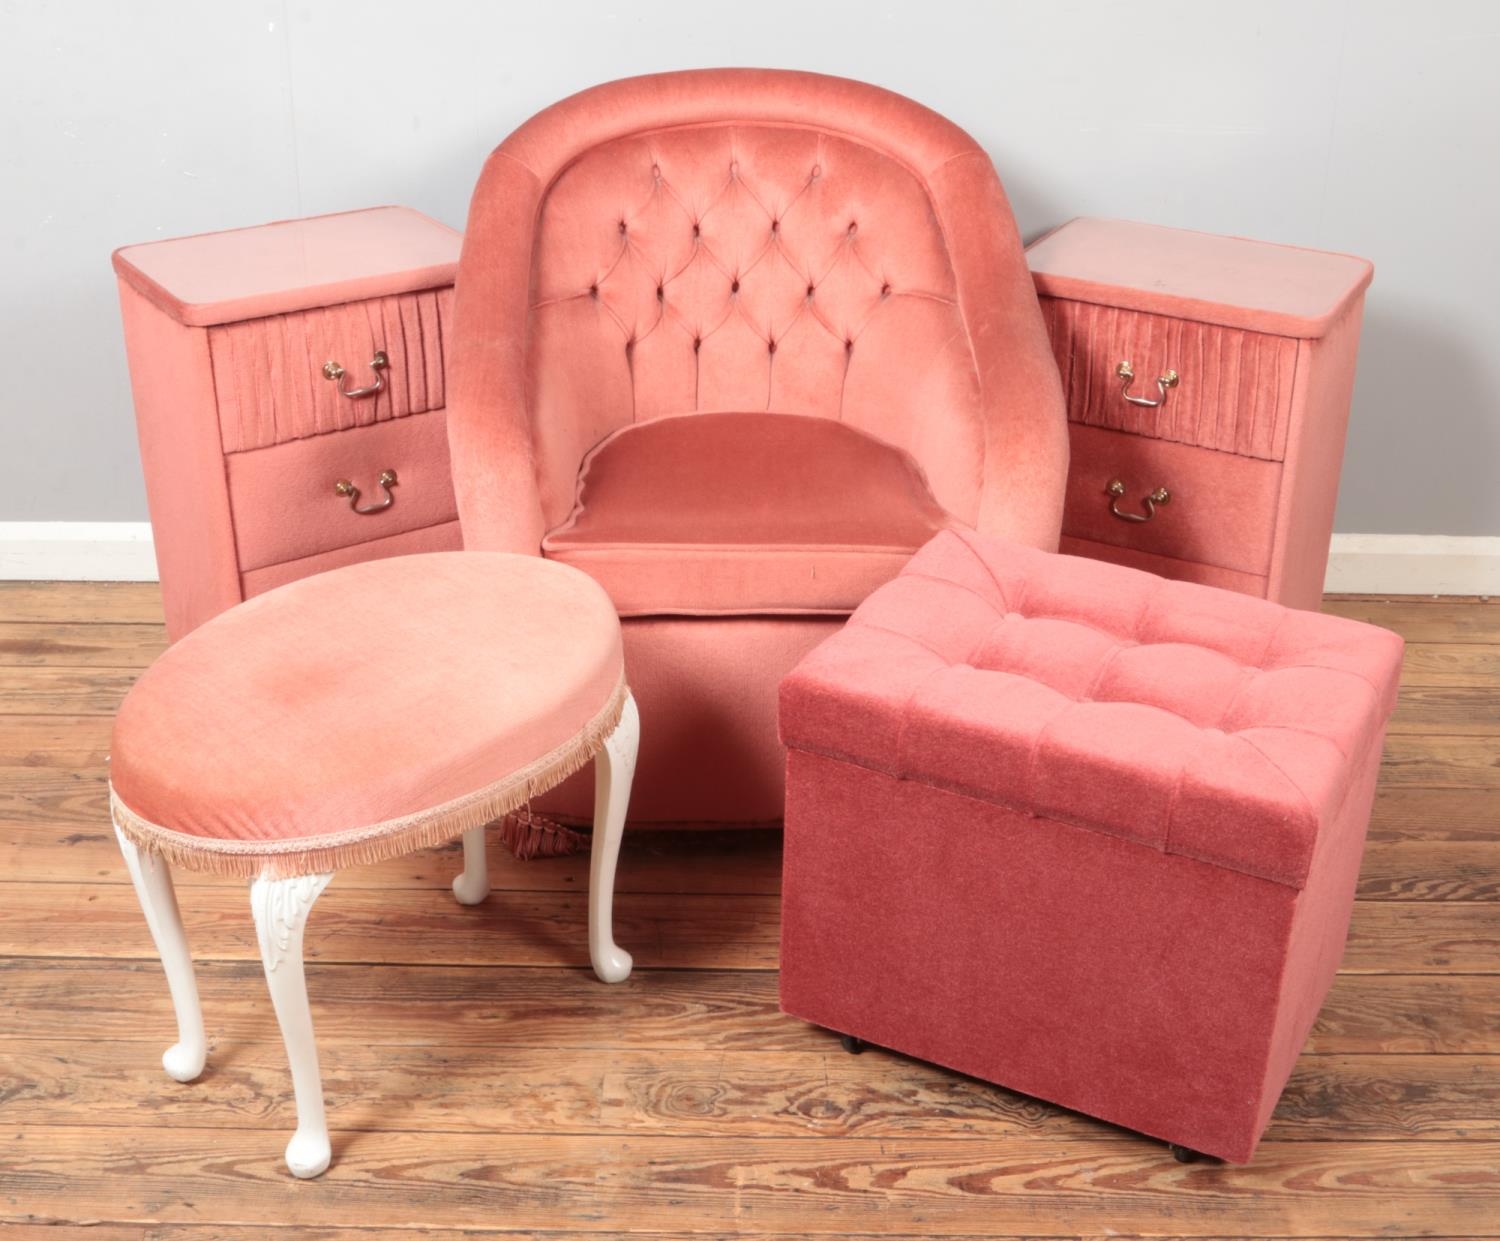 Five pieces of pink upholstered furniture. Includes pair of bedside chests, arm chair, storage box